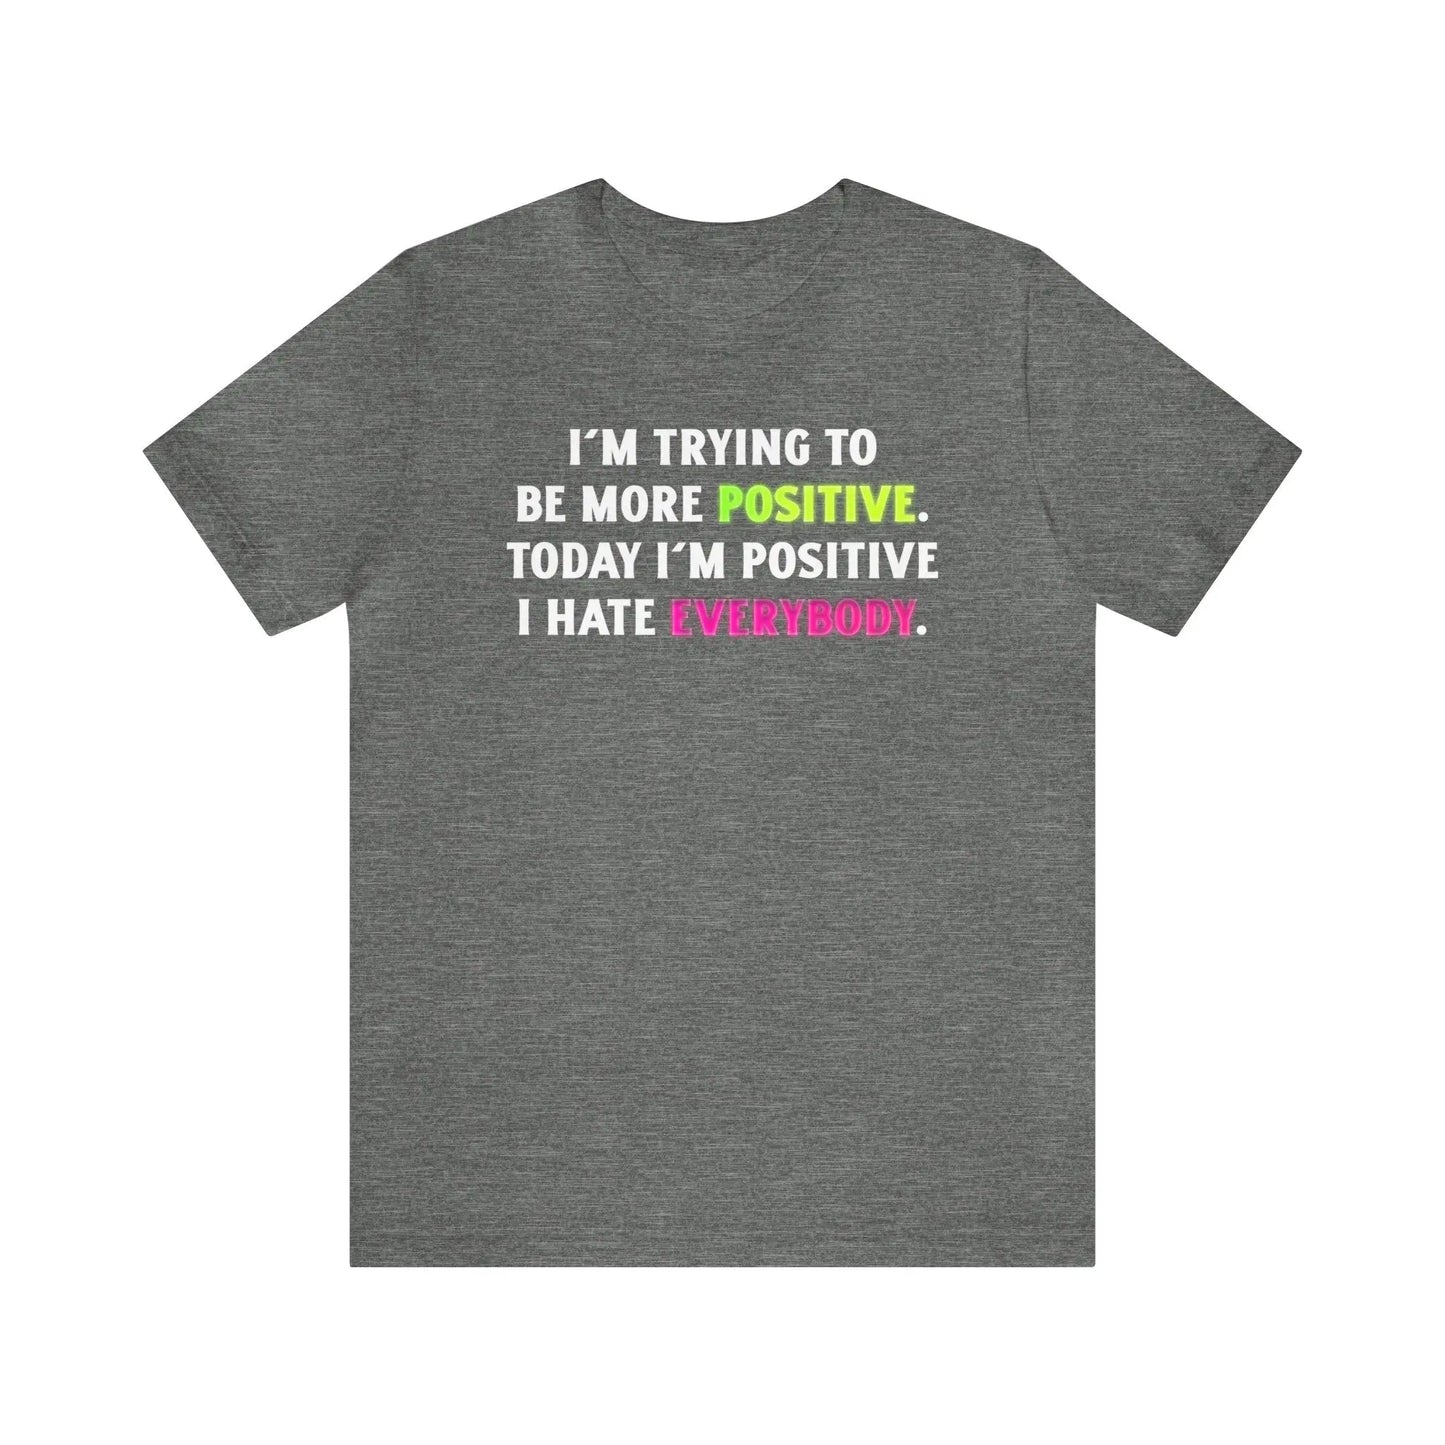 I'm Trying To Be More Positive Men's Tee - Wicked Tees